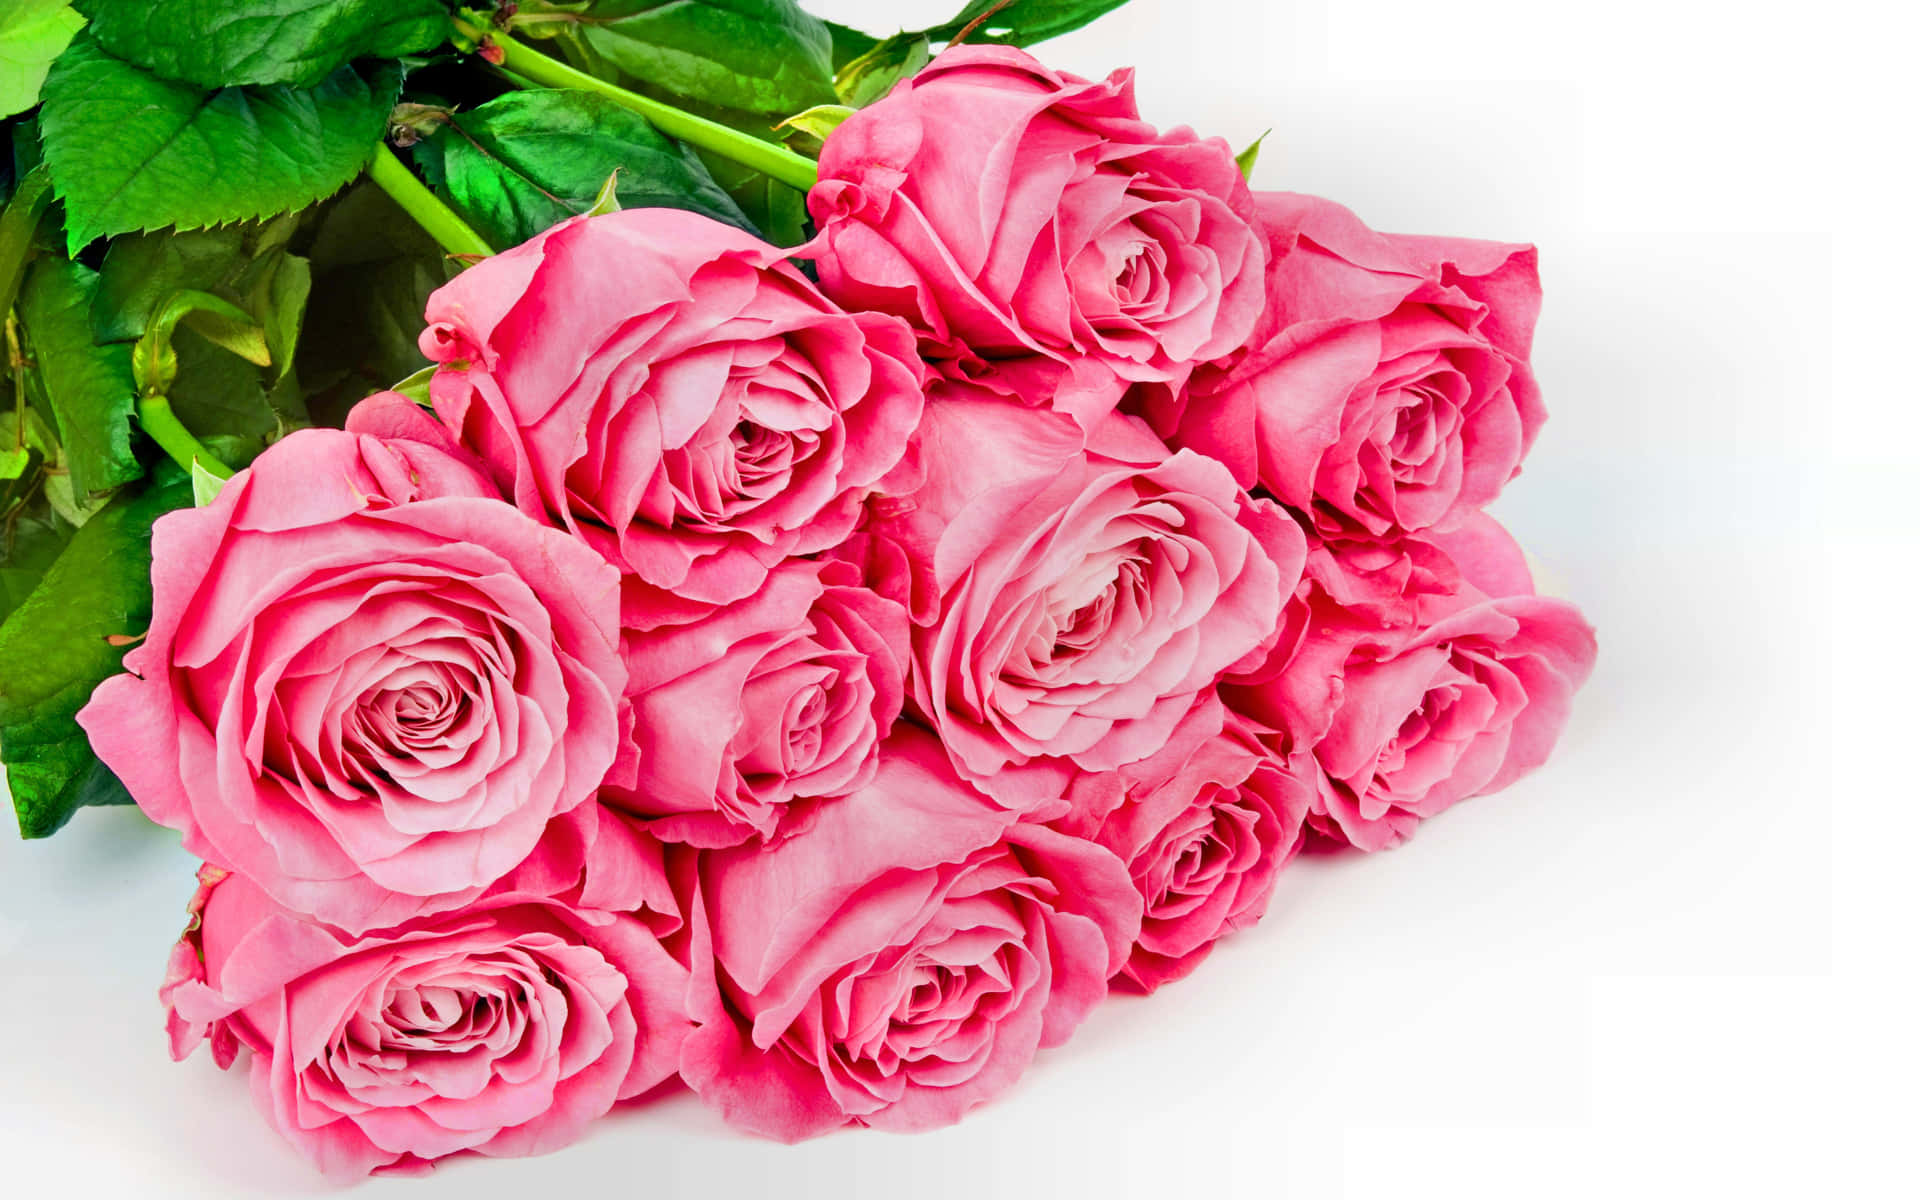 Pink Roses On White Table Background